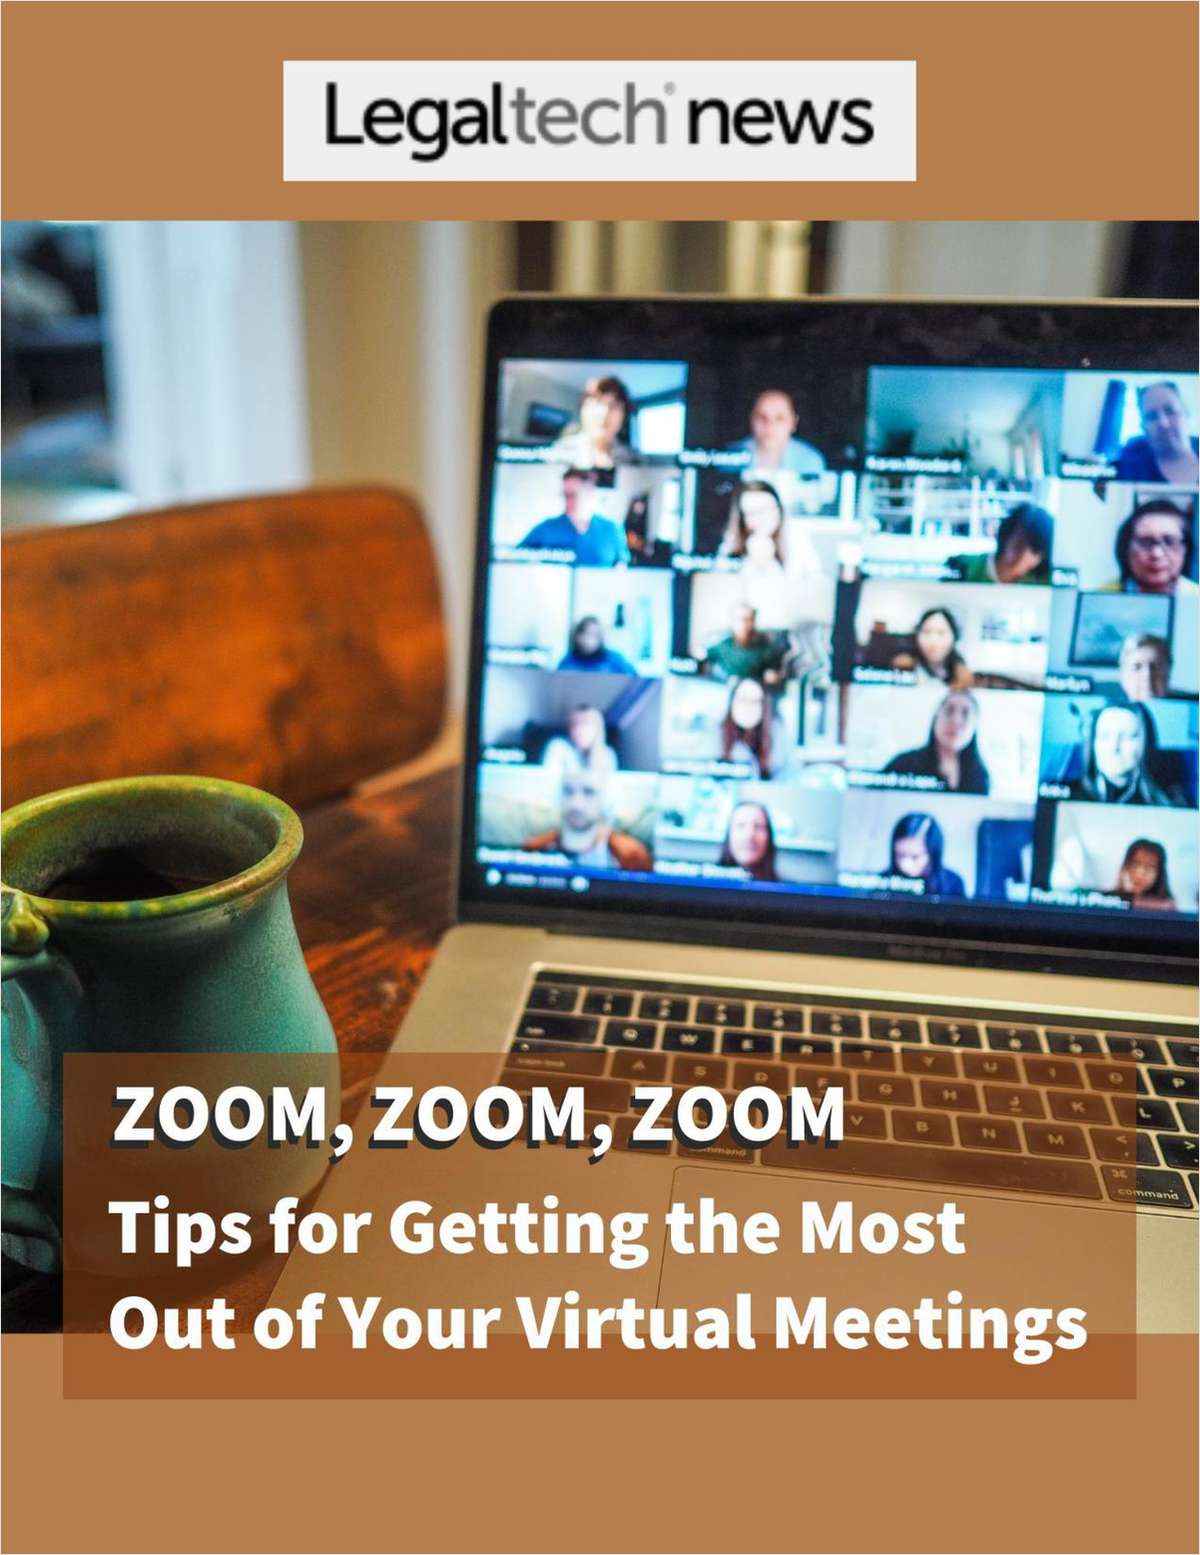 zoom video how long for free meetings